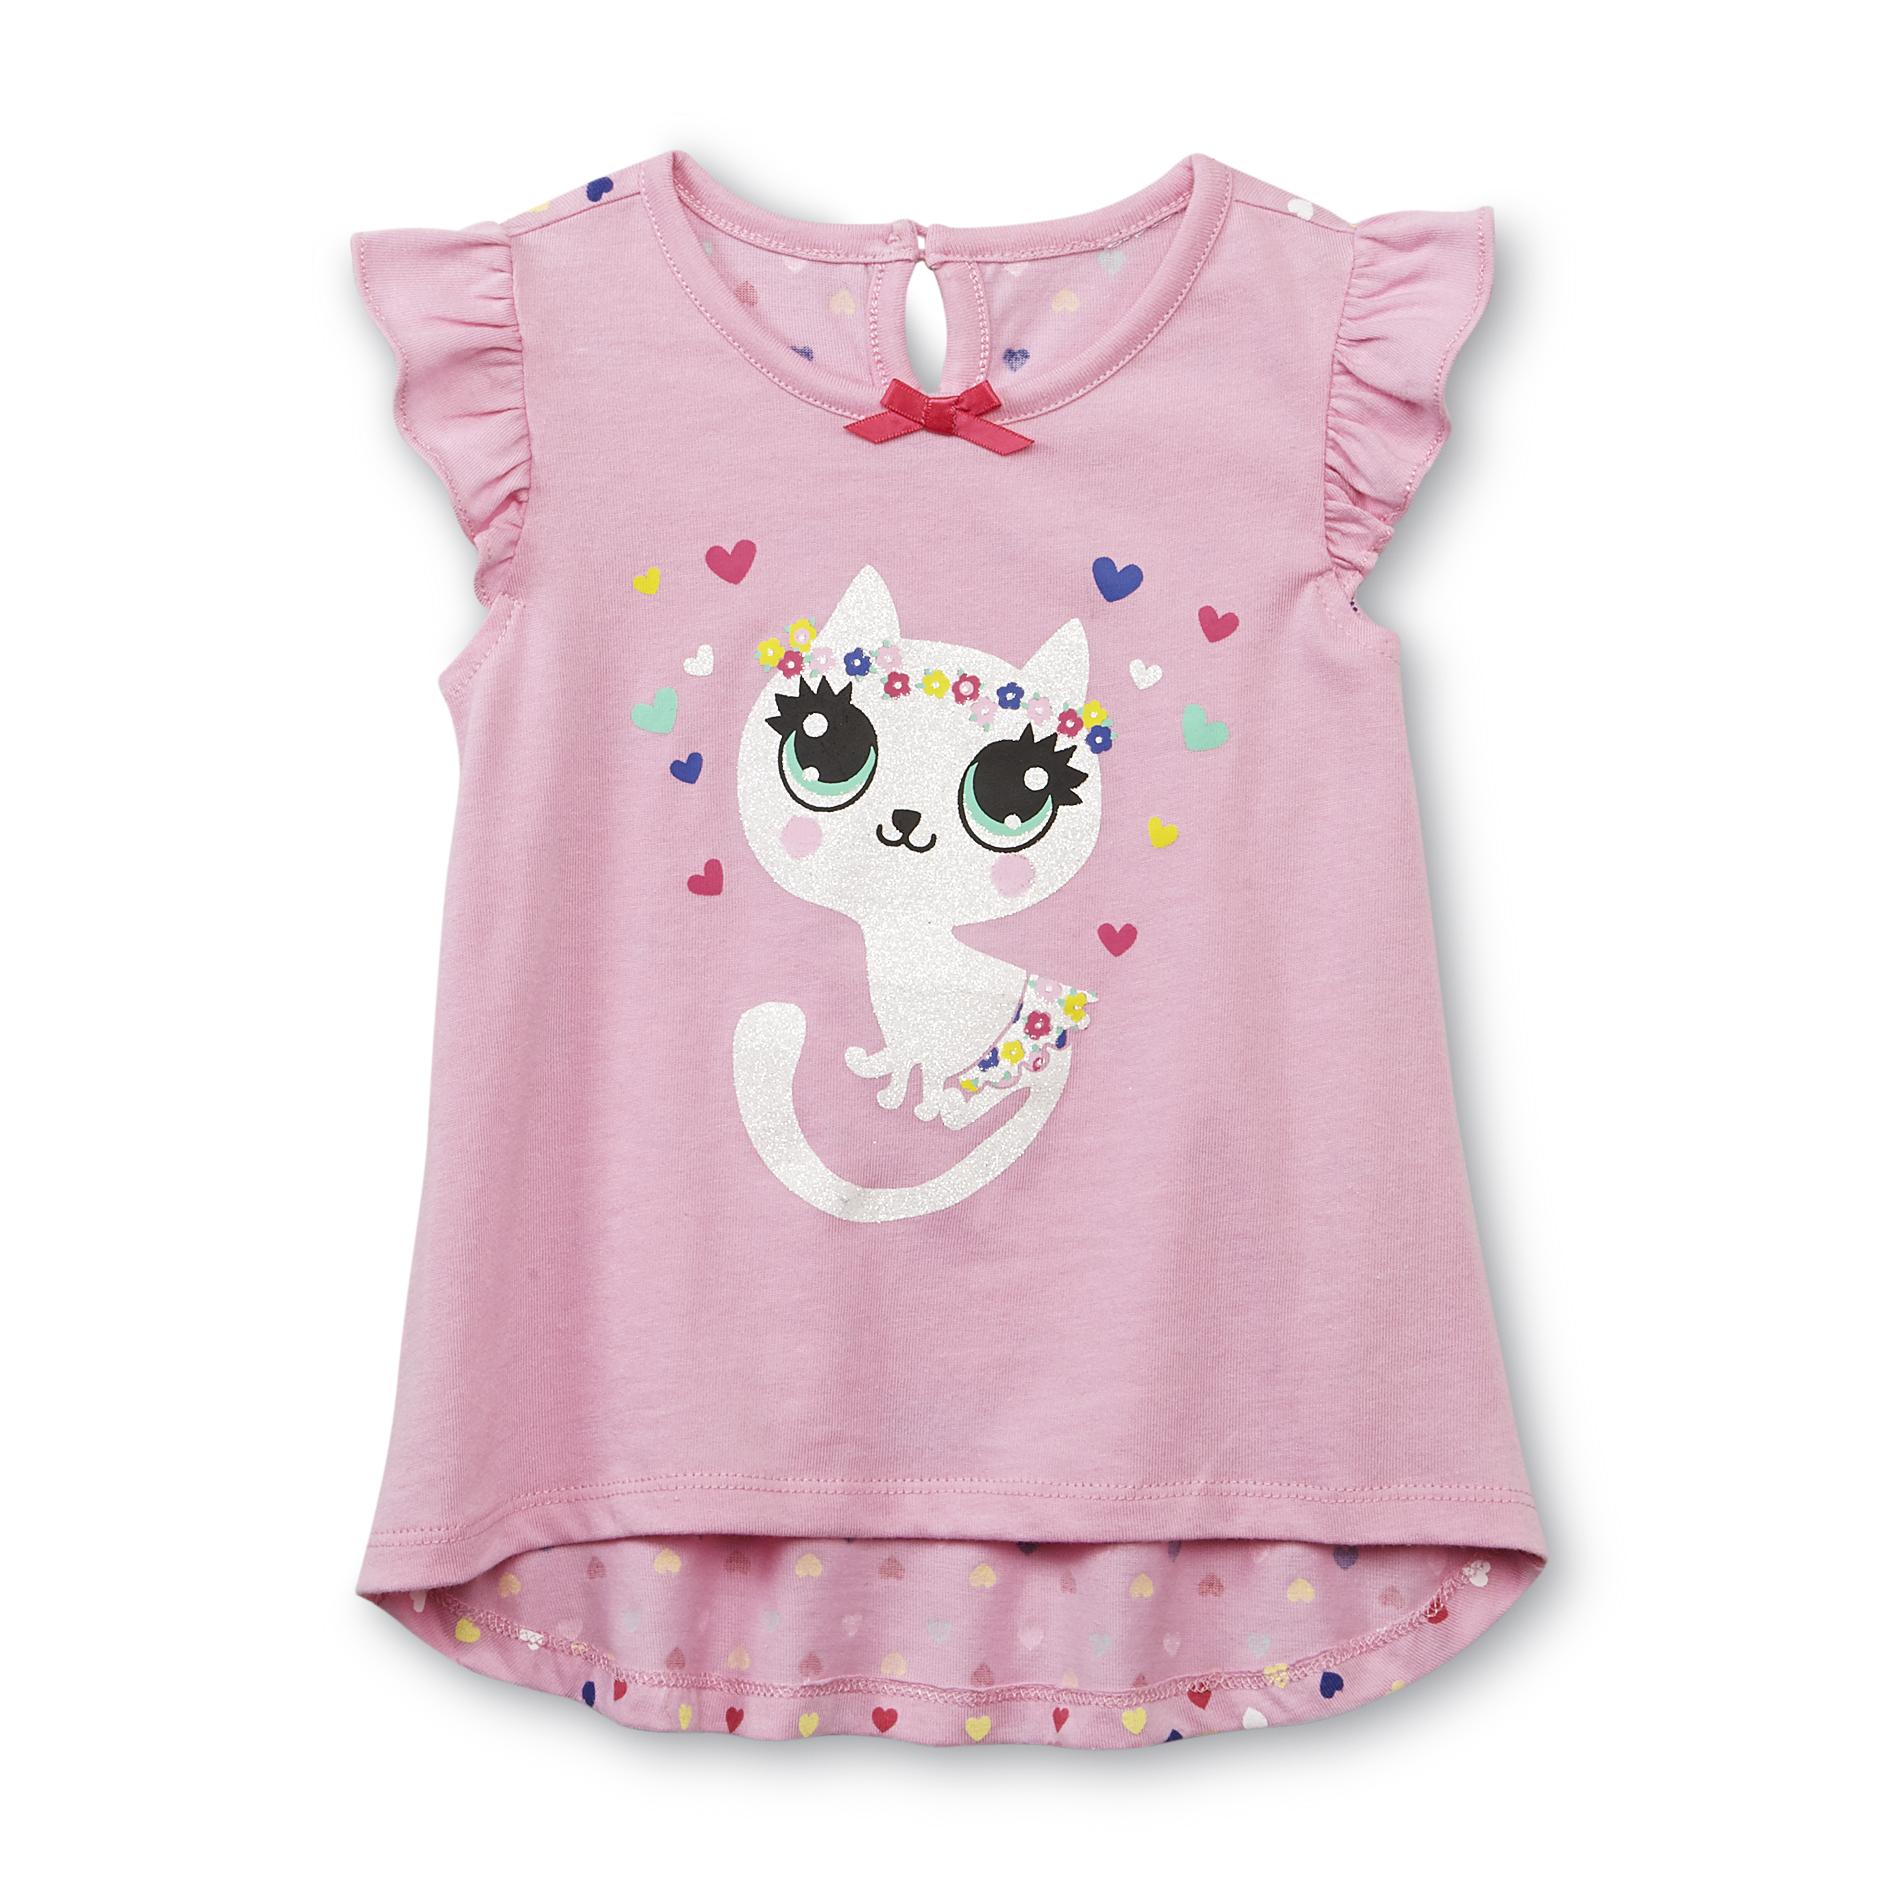 WonderKids Infant & Toddler Girl's High-Low Top - Cat & Hearts